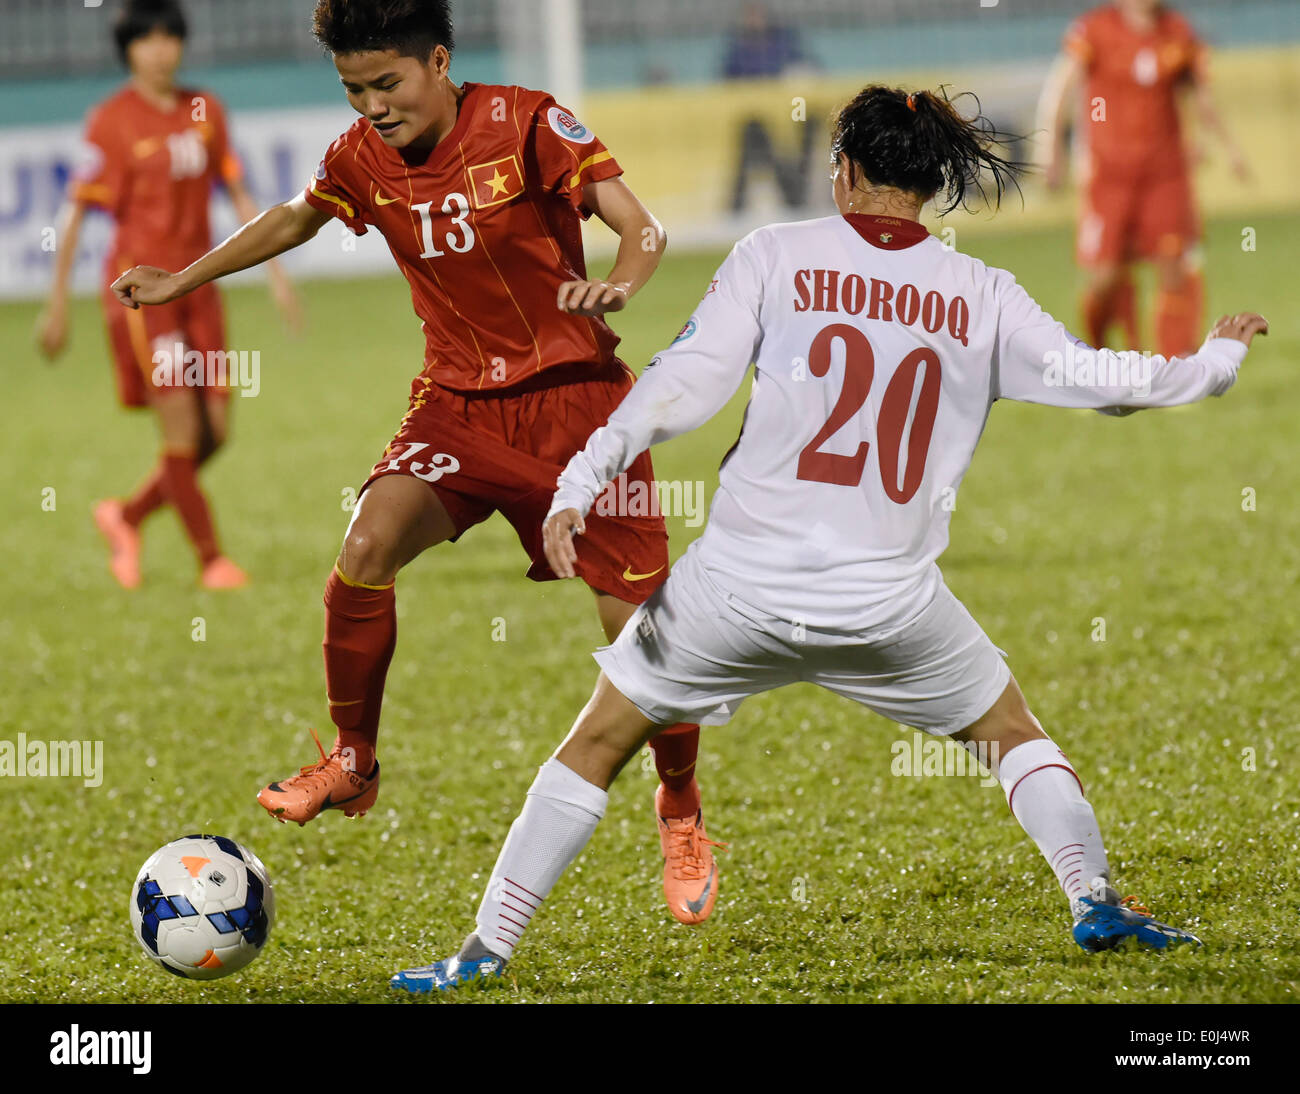 Ho Chi Minh City, Vietnam. 14th May, 2014. Vietnam's Nguyen Thi Muon (L) vies with Jordan's Shorooq Khalil Moh'd Shathli during their Group A match at the 2014 AFC Women's Asian Cup held at Thong Nhat Stadium in Ho Chi Minh city, Vietnam, May 14, 2014. Vietnam beat Jordan 3-1. © He Jingjia/Xinhua/Alamy Live News Stock Photo